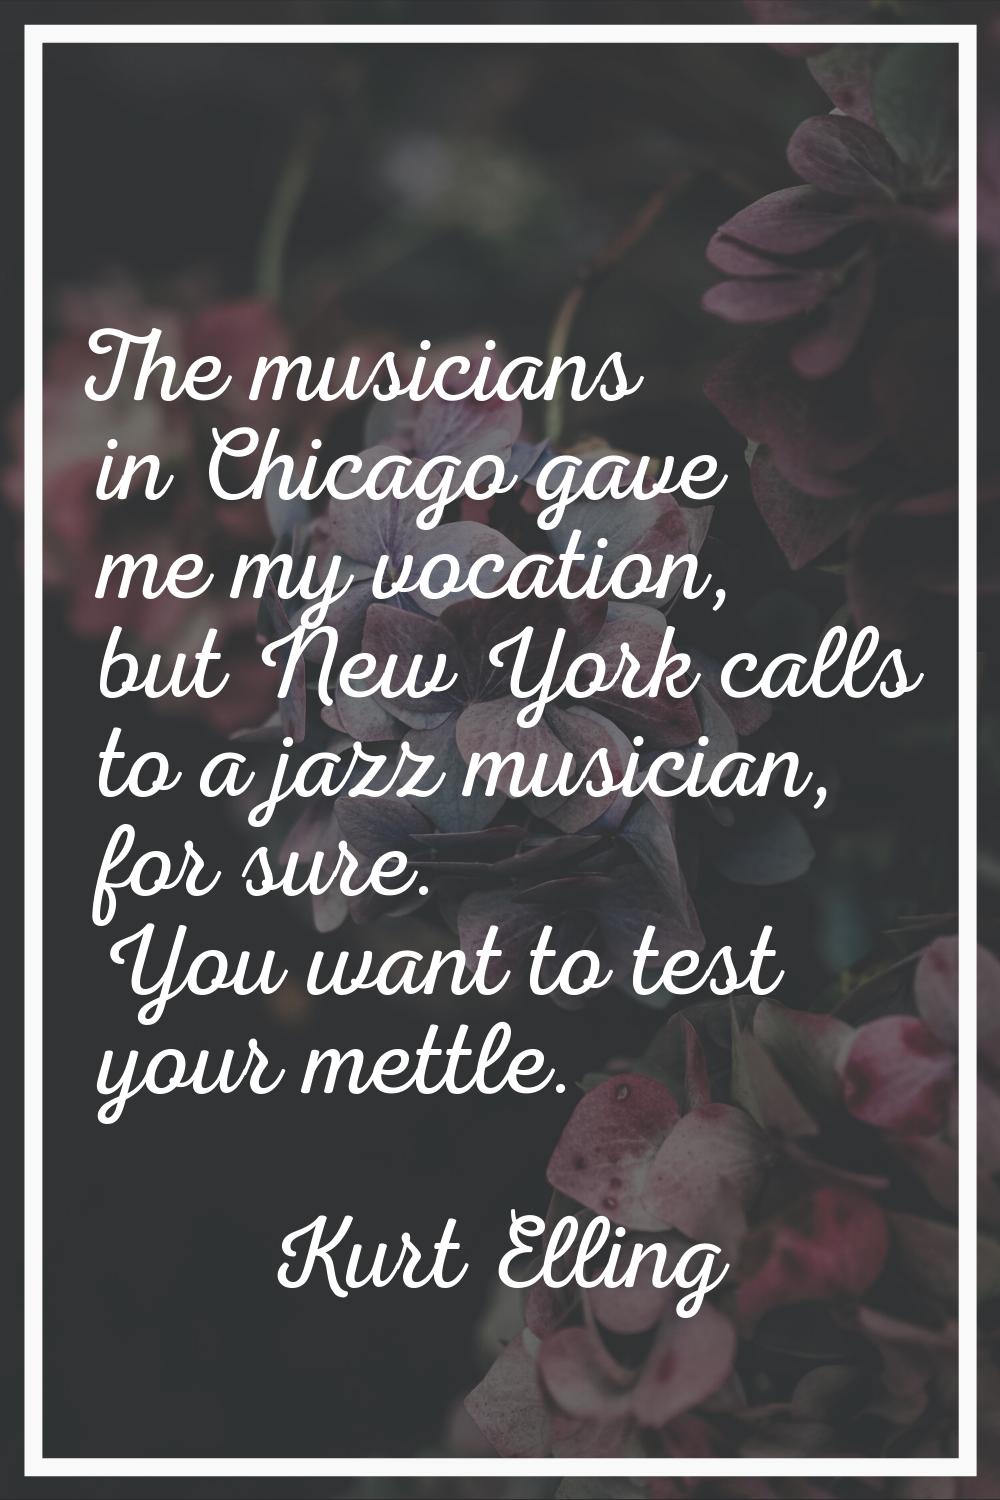 The musicians in Chicago gave me my vocation, but New York calls to a jazz musician, for sure. You 